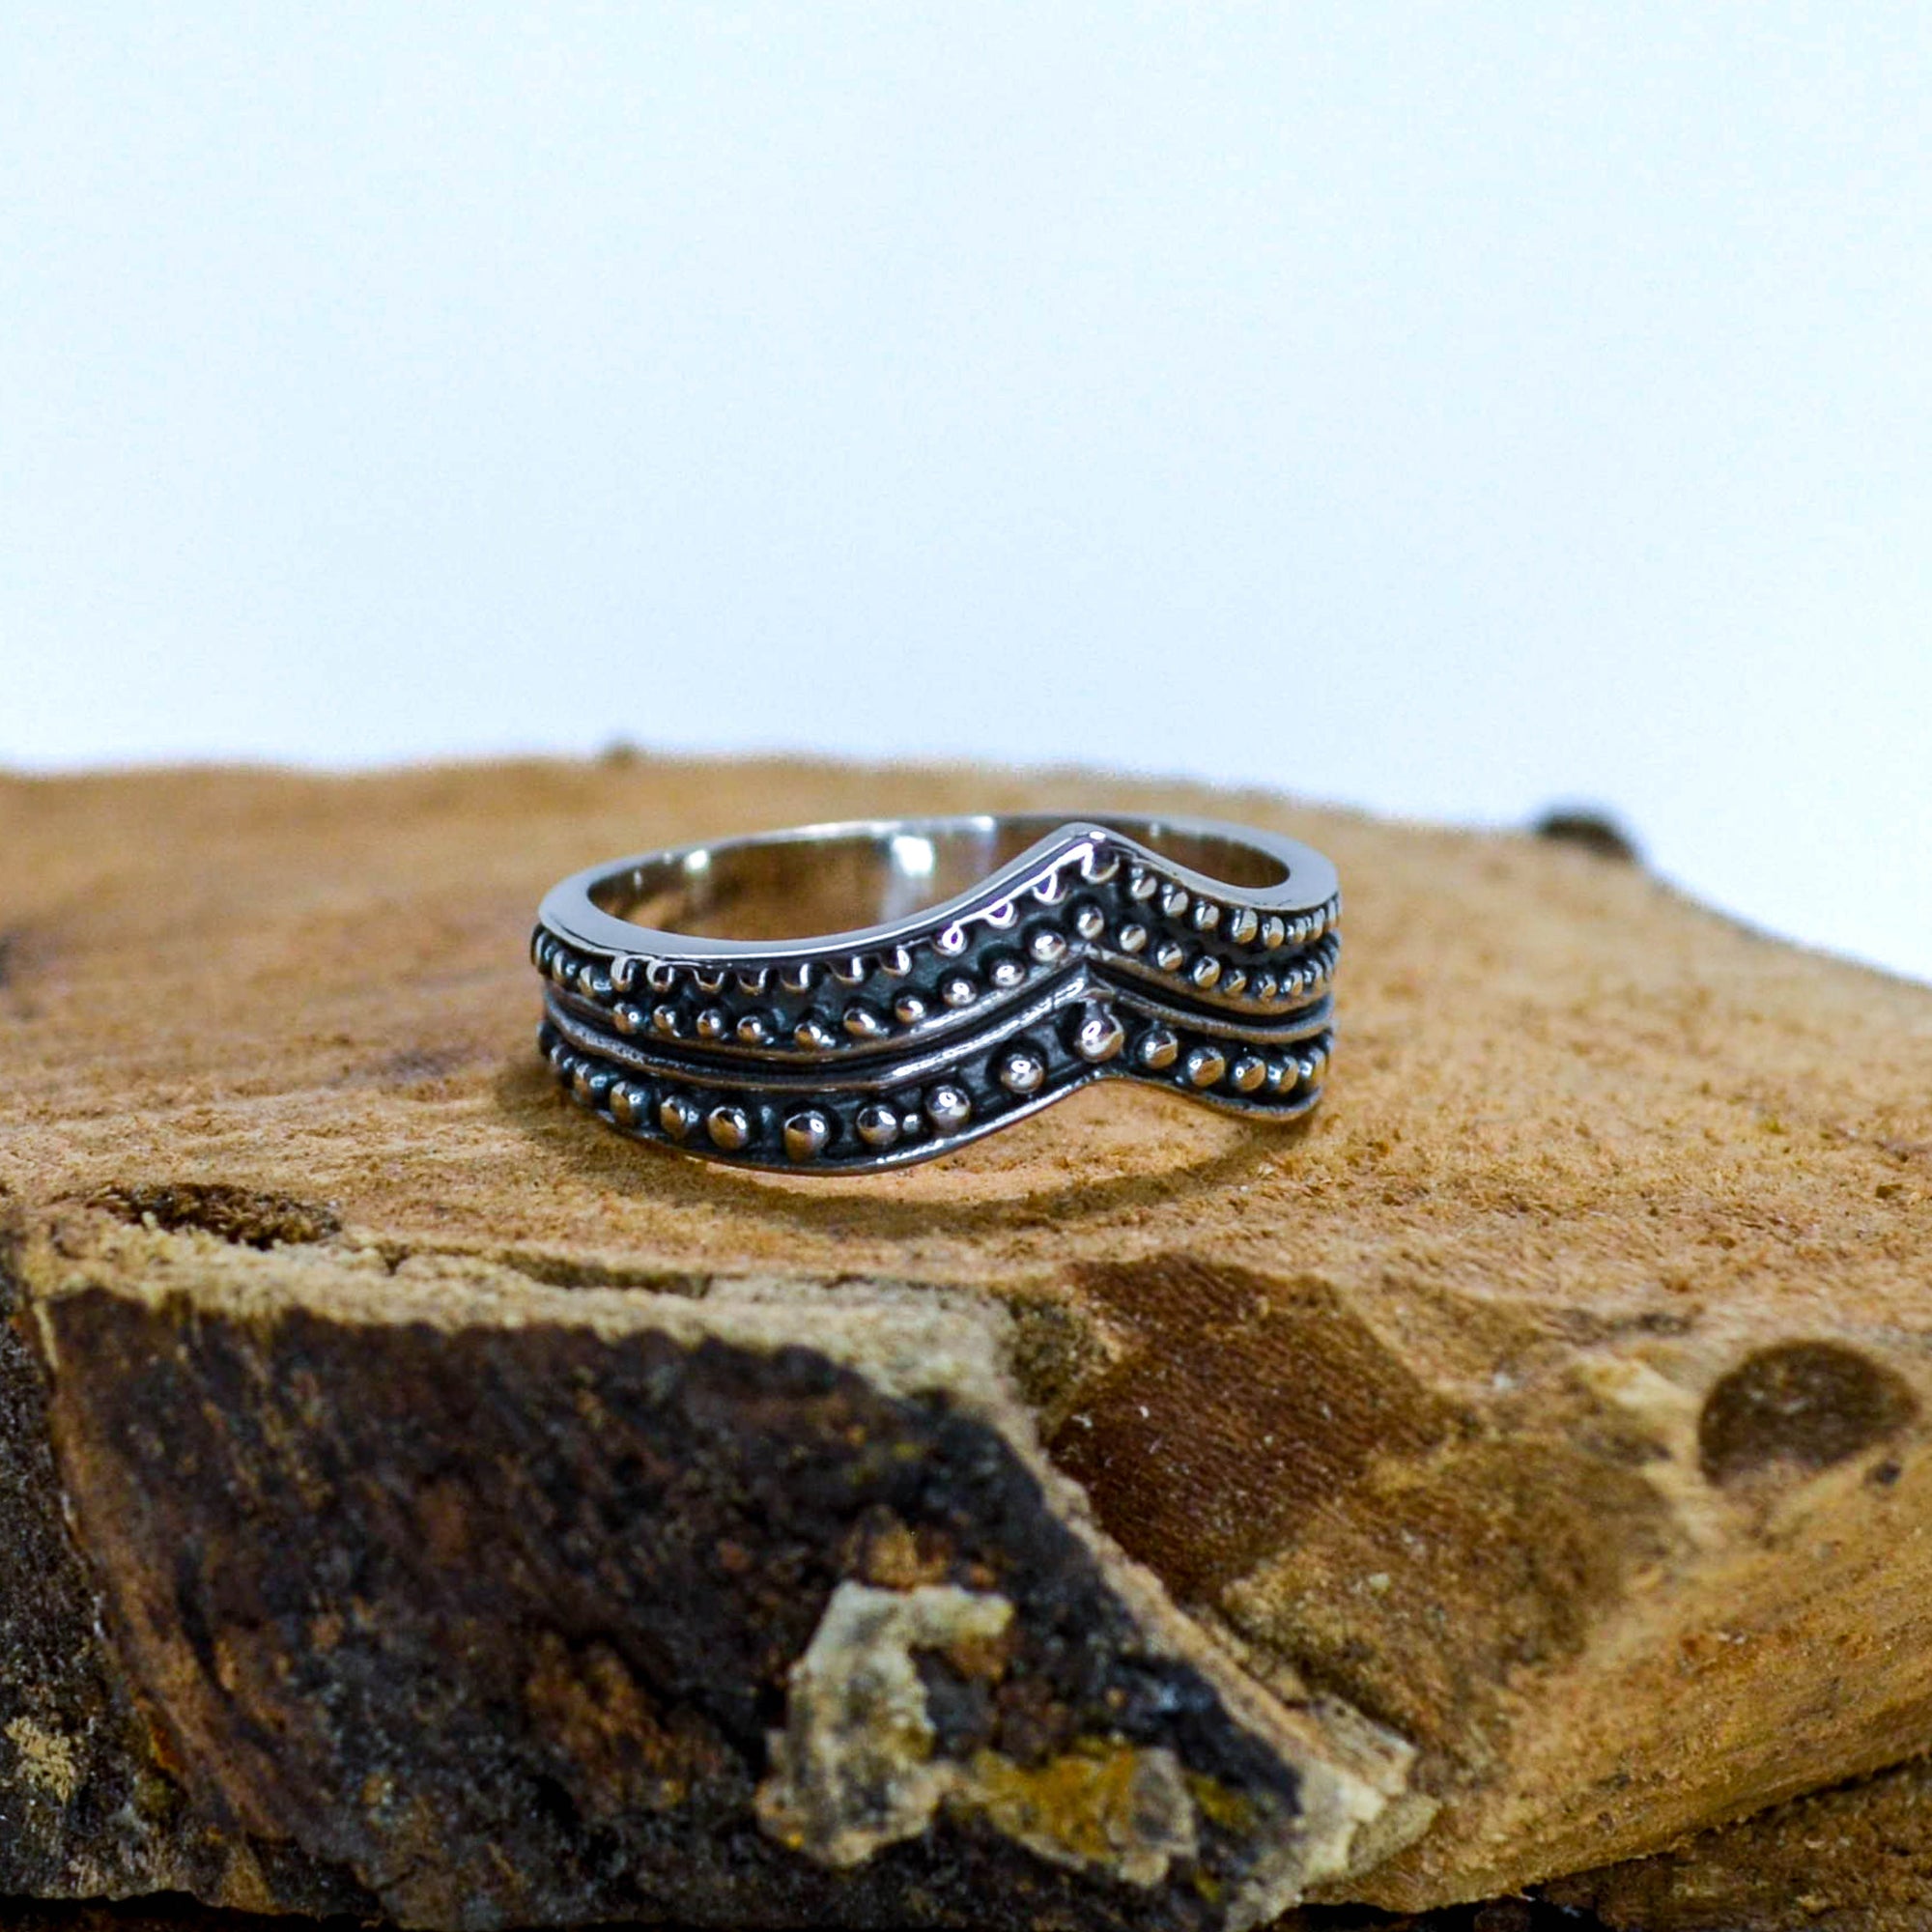 V shaped silver ring with dots sitting on wood